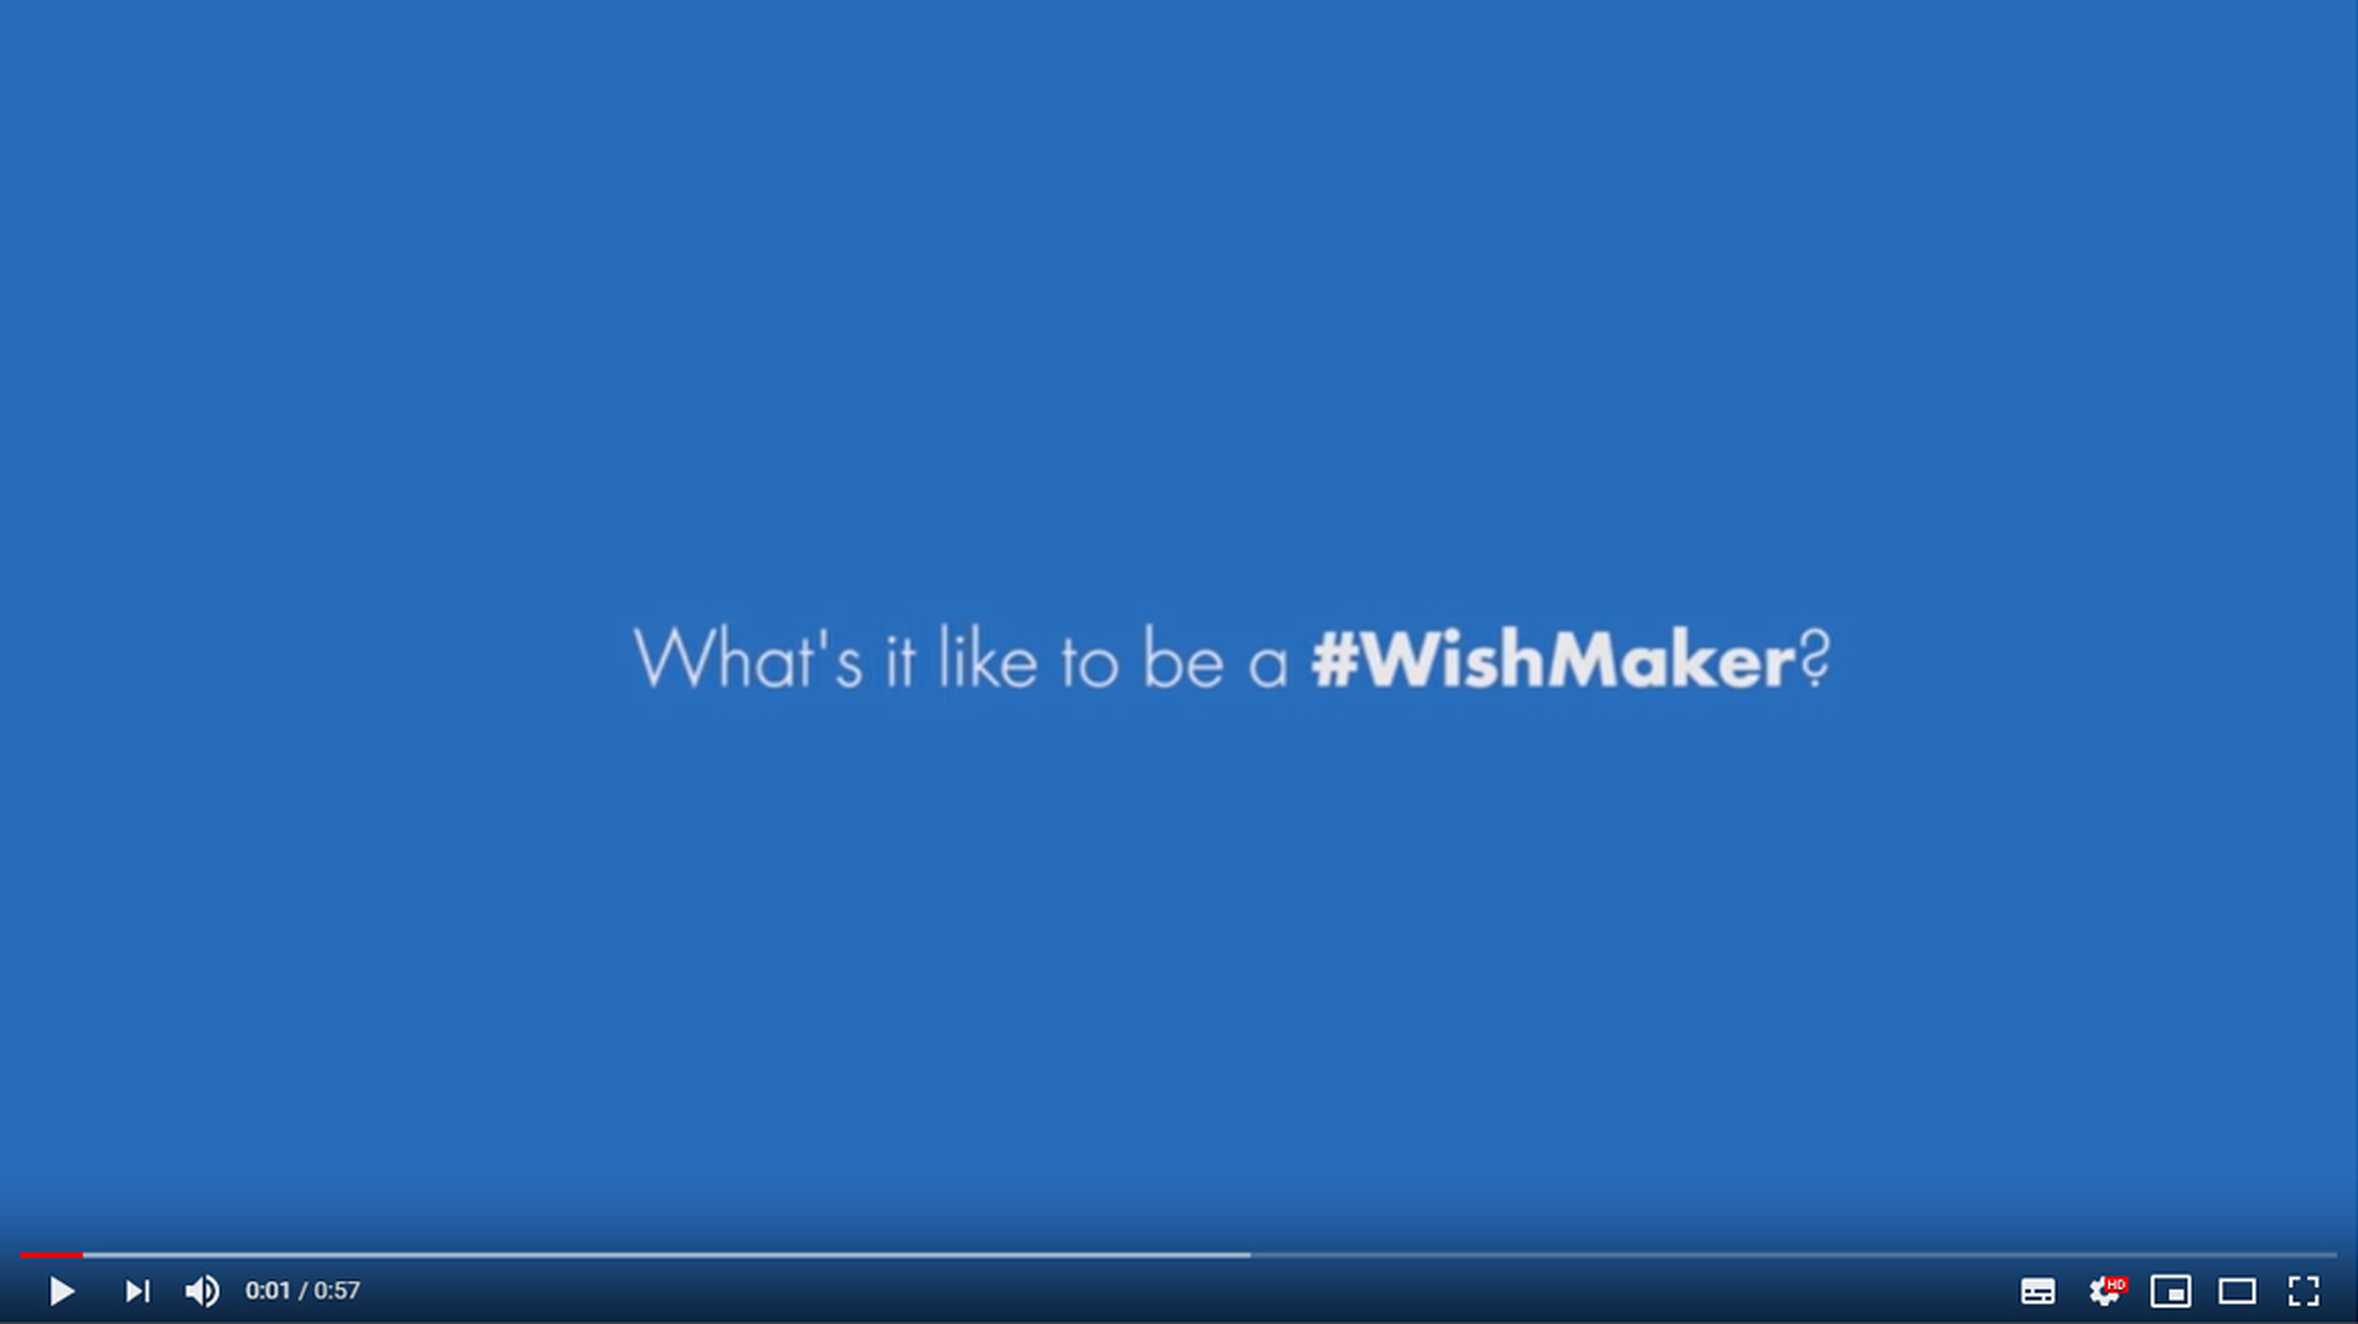 What's it like to be a #WishMaker?